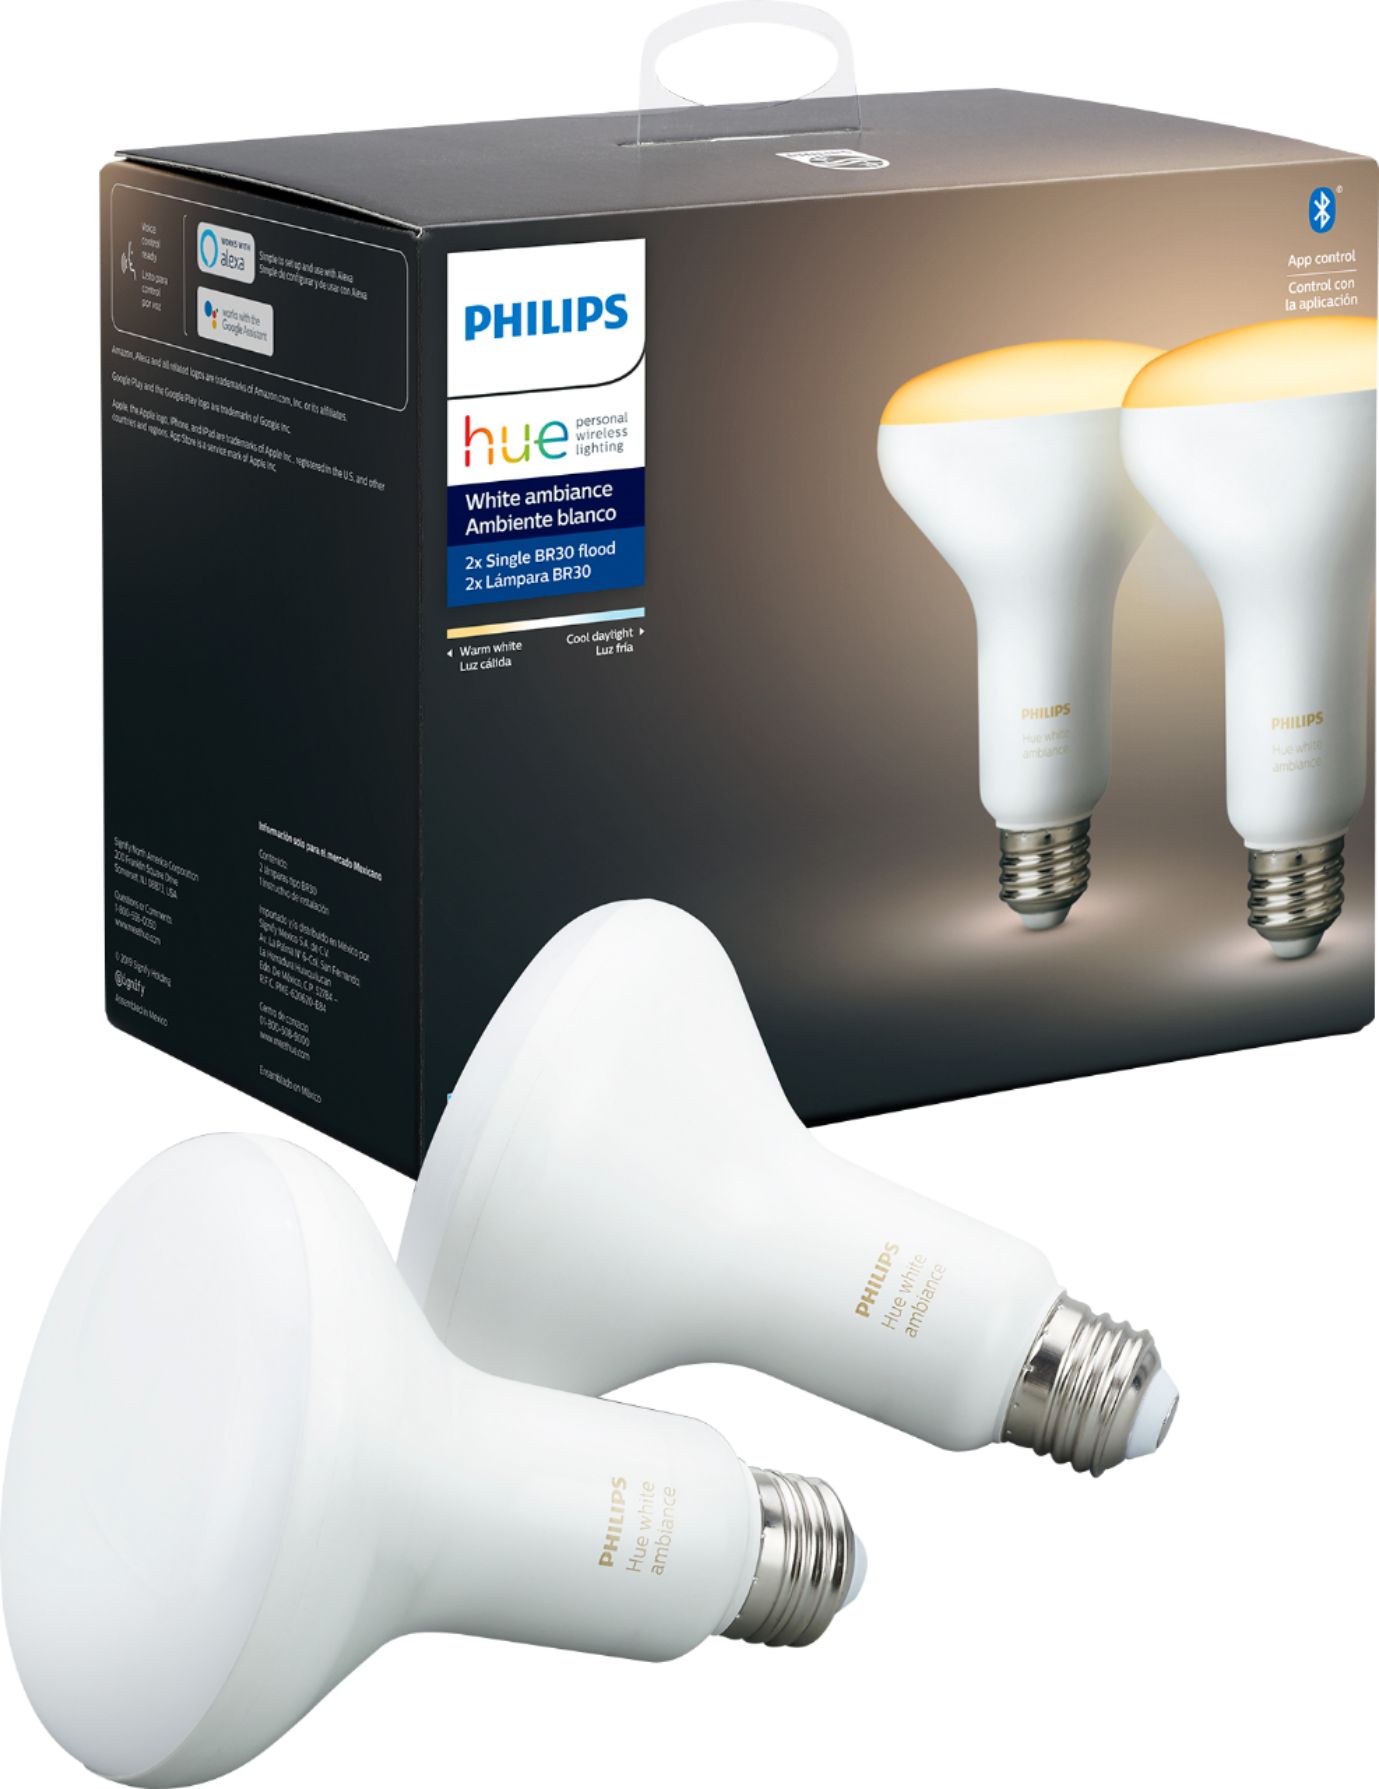 Philips Hue White Smart Bulb 8 pack GU10 with Bluetooth